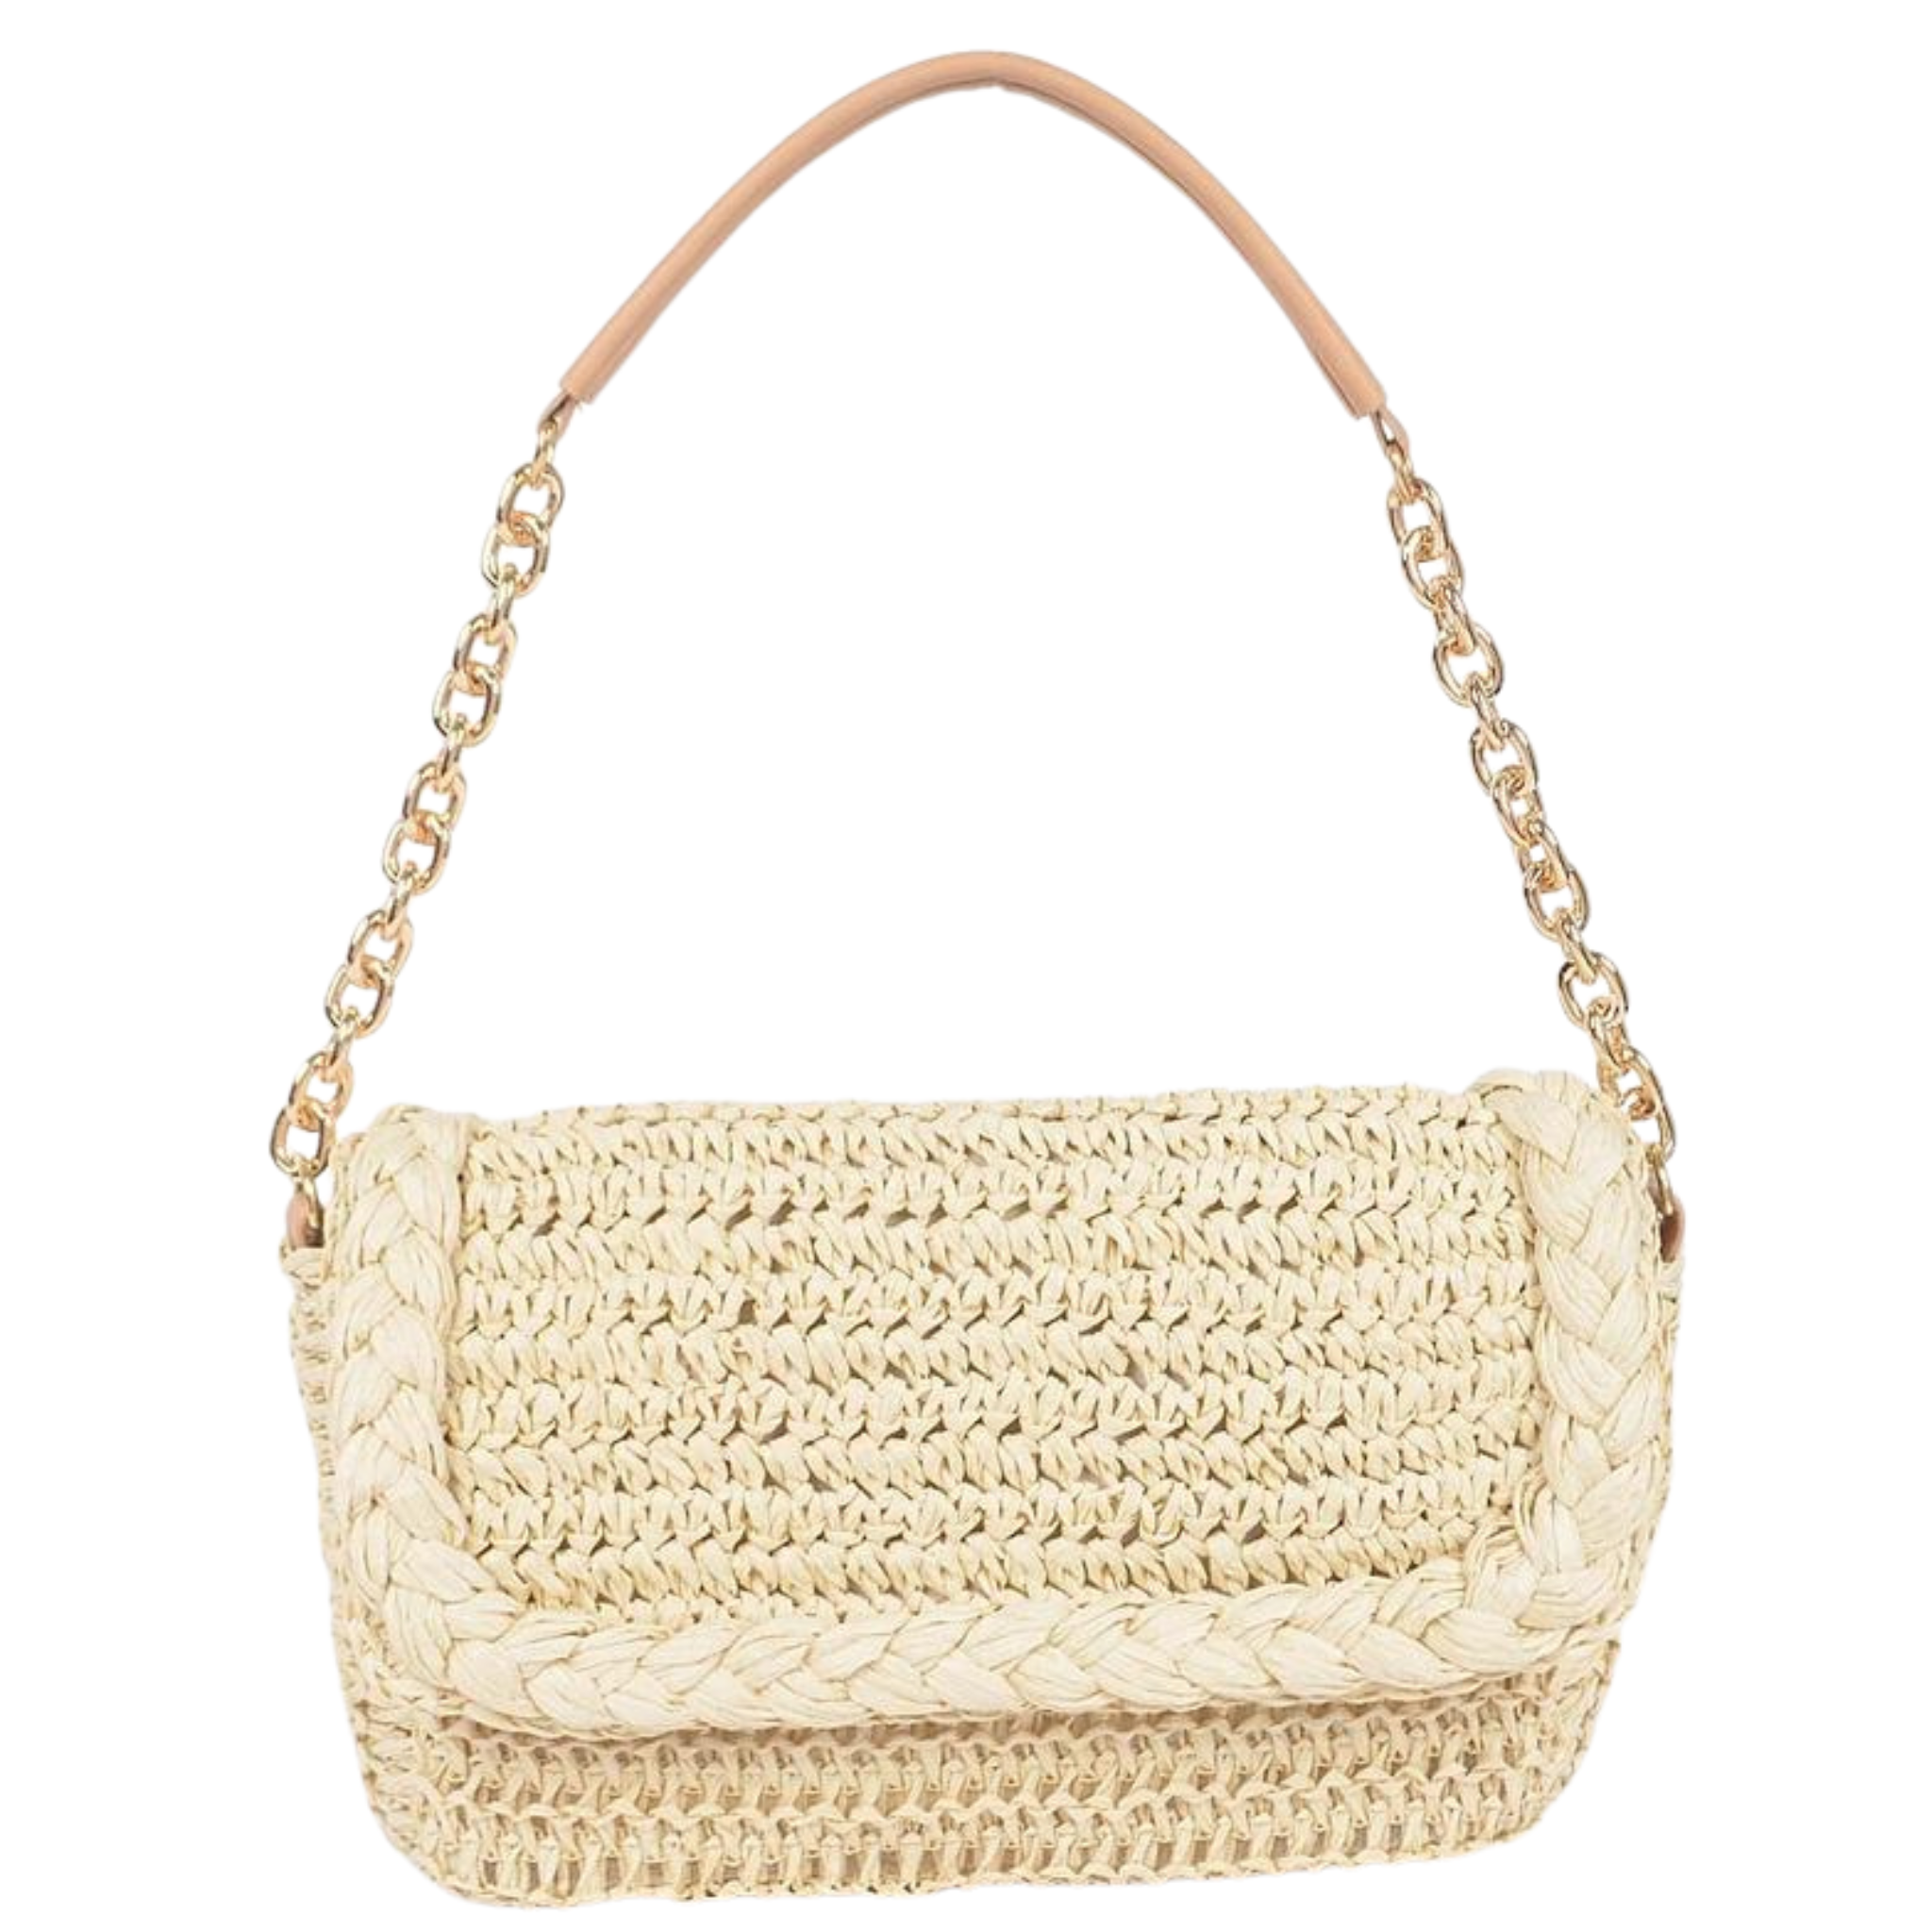 Straw Shoulder Bag With Chain Handle